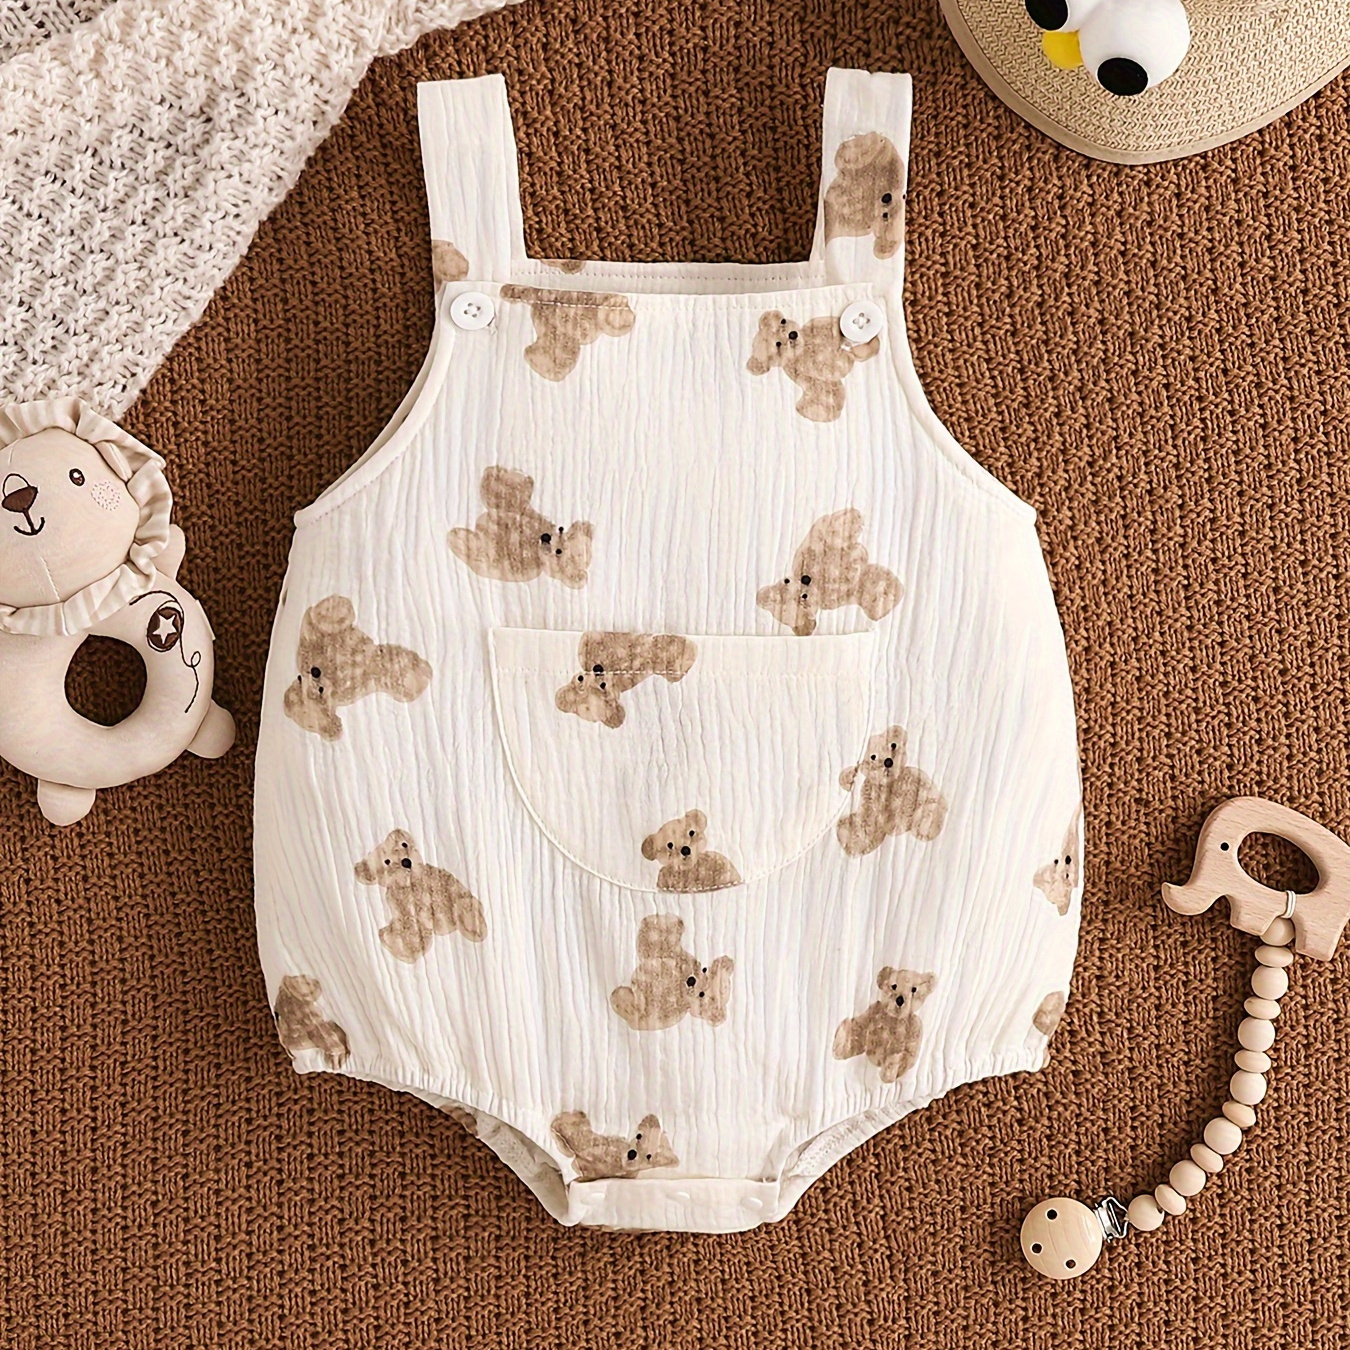 

Unisex Infant Bear Print Pure Cotton Romper, Casual Style, Sleeveless Buttoned Overalls With Front Pocket, Soft Cotton Blend, Baby Outfit, Newborn To Toddler Sizes